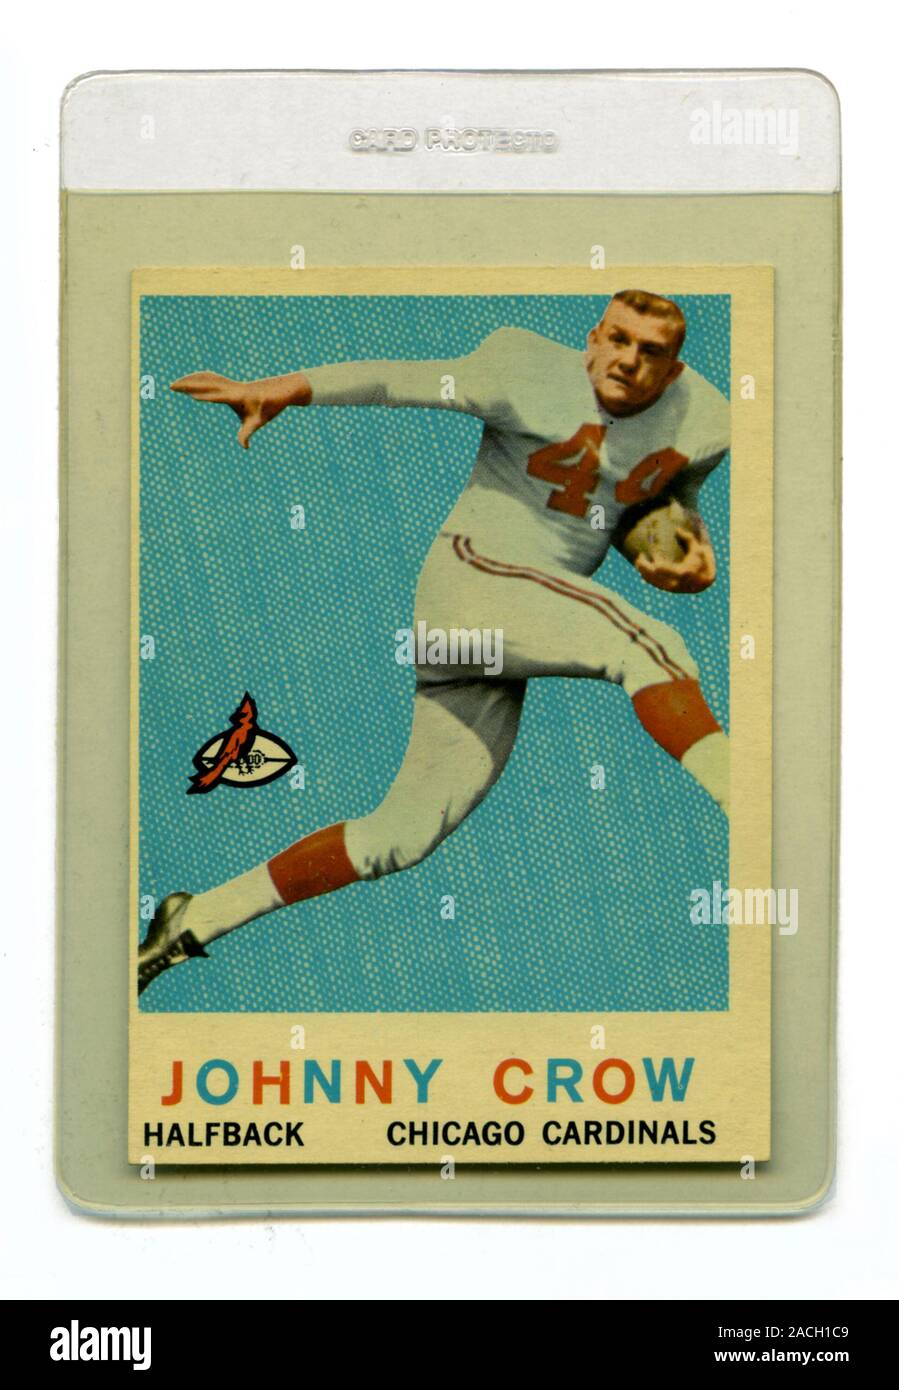 Classic football card depicting Johnny Crow a halfback with the Chicago Cardinals   issued by Topps Gum in 1959. Stock Photo